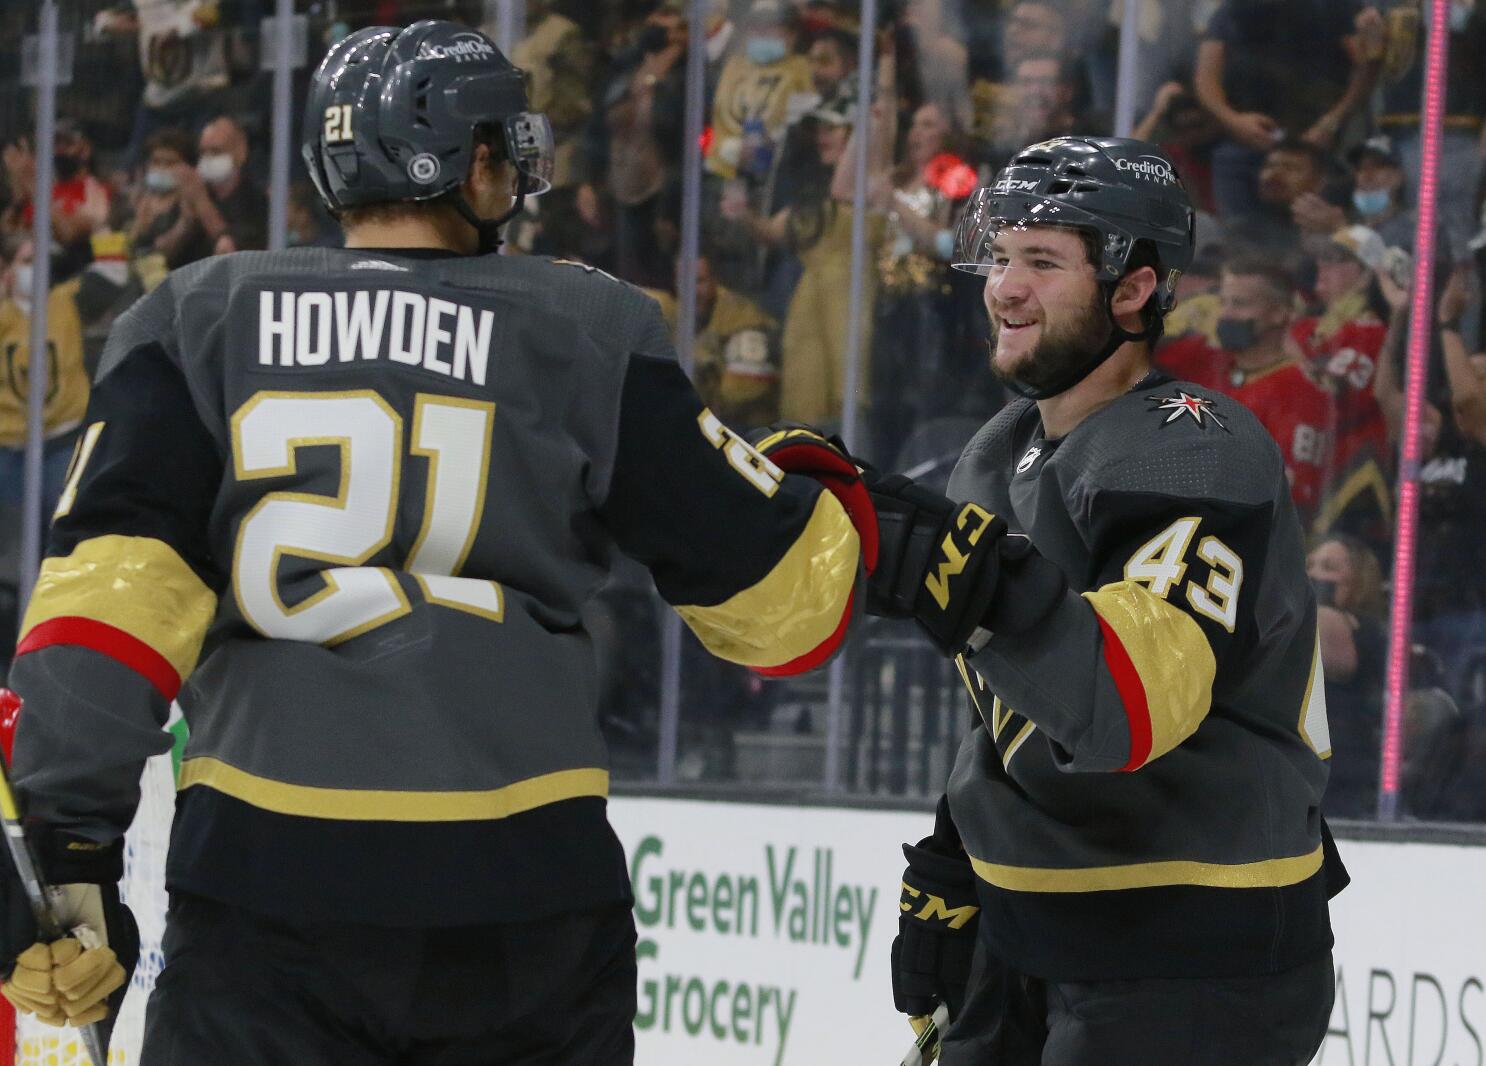 Vegas Golden Knights Inaugural Roster - Where Are They Now?